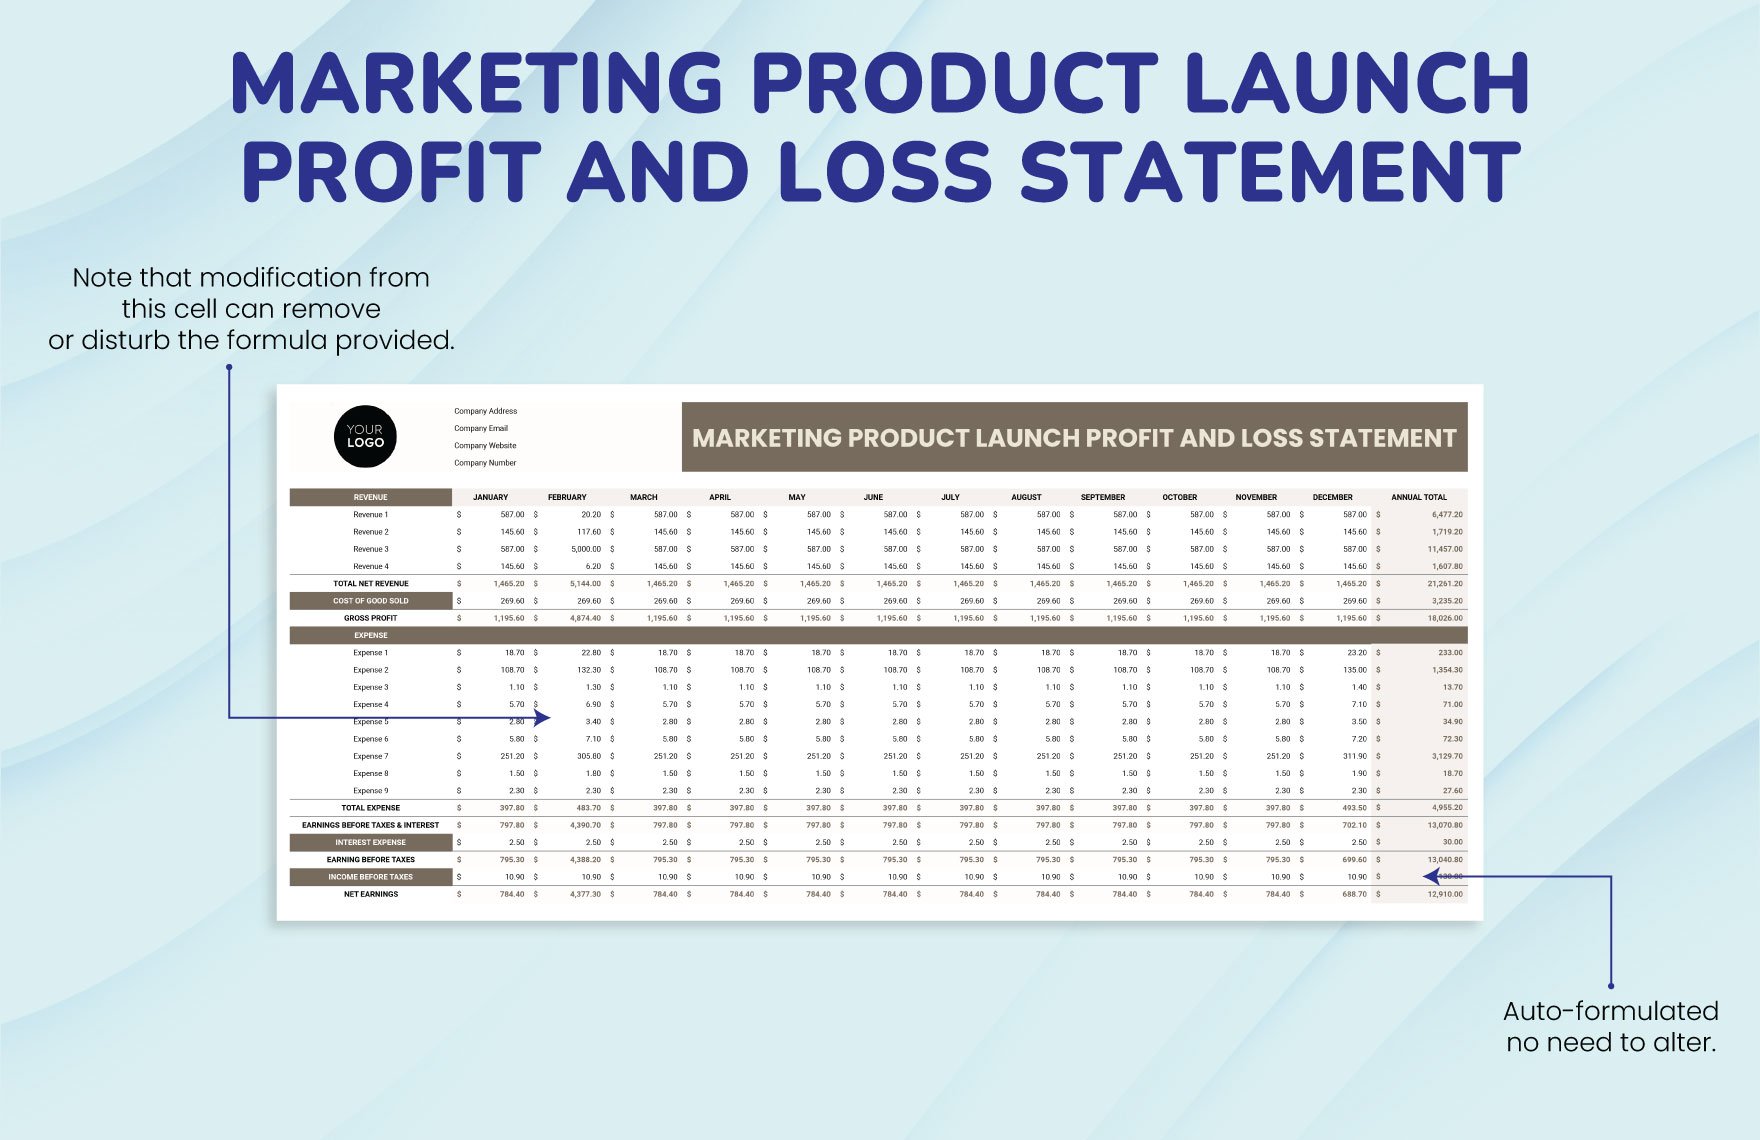 Marketing Product Launch Profit and Loss Statement Template